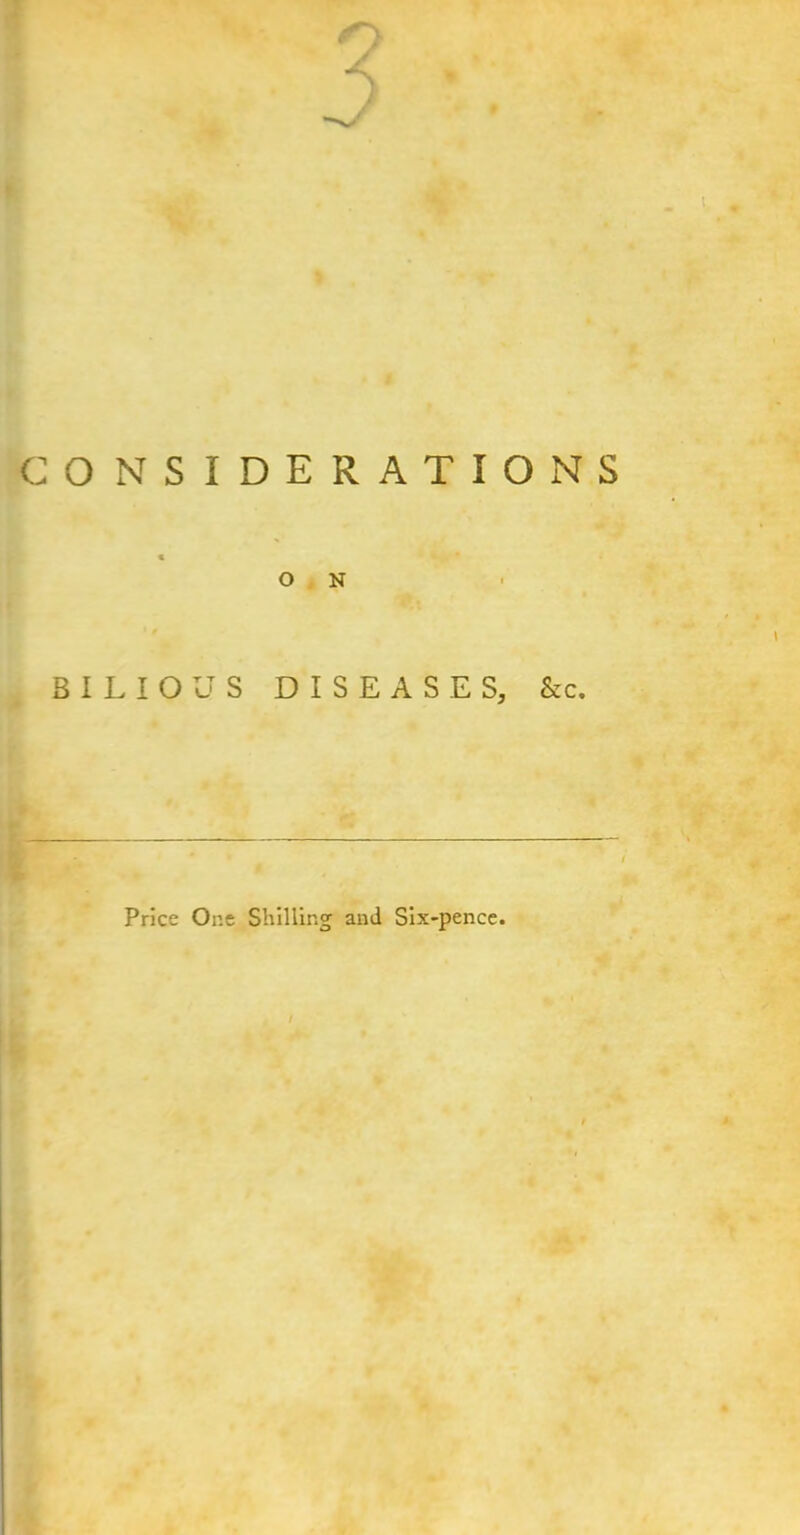 BILIOU O N S DISEASES, &c. Price One Shilling and Six-pence.